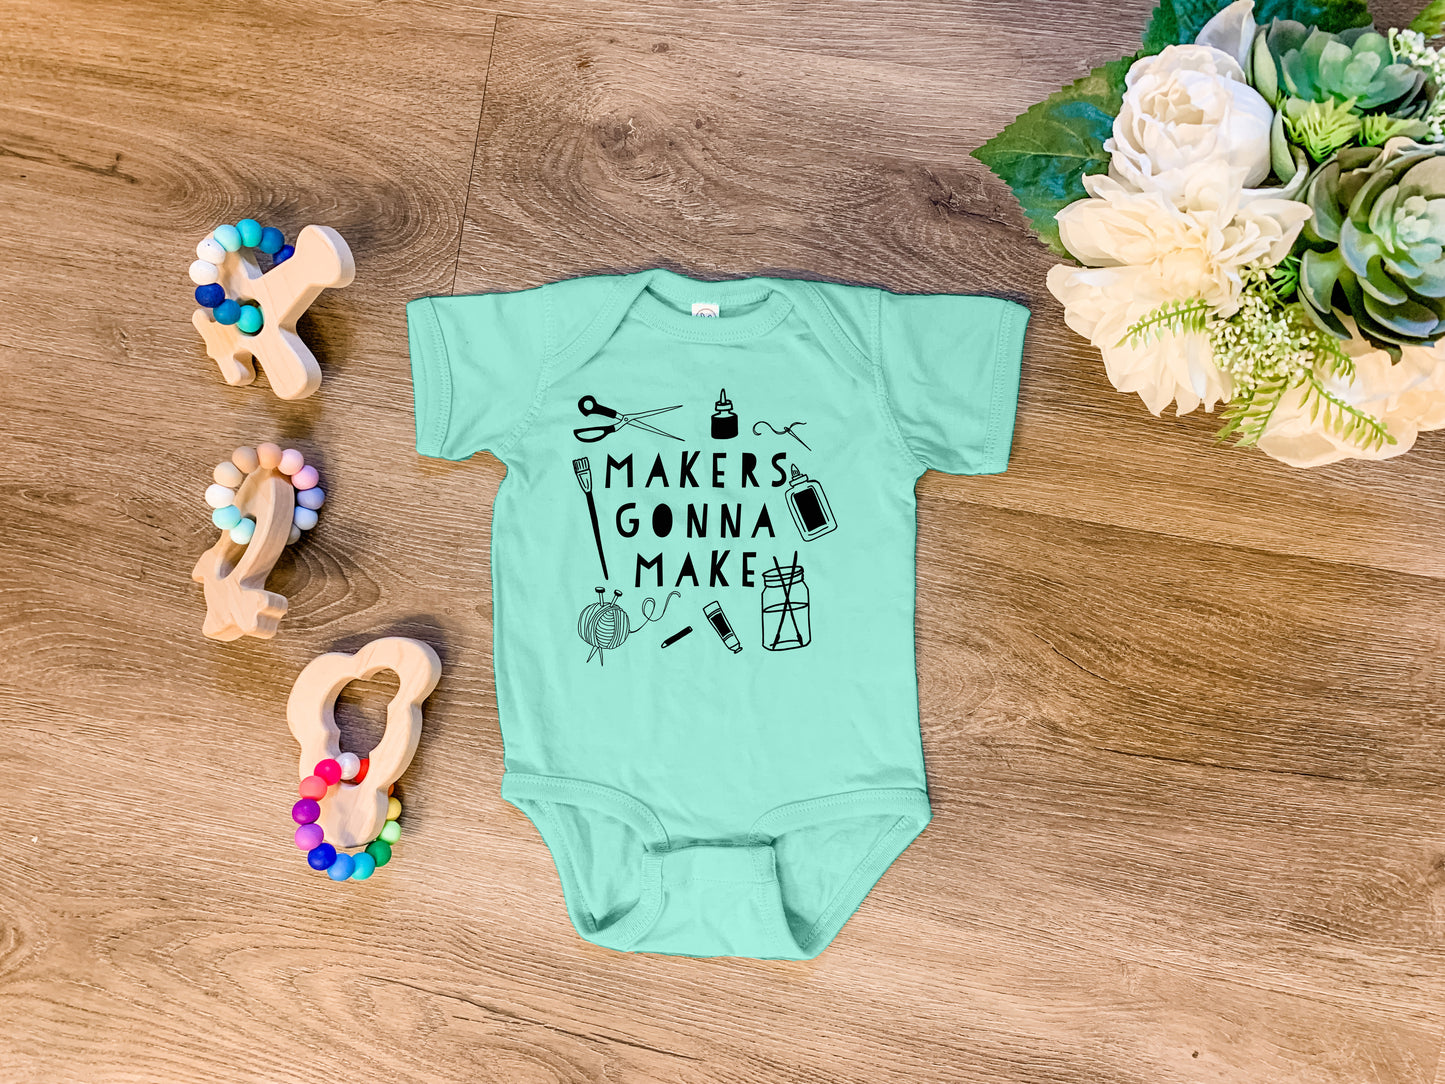 Makers Gonna Make - Onesie - Heather Gray, Chill, or Lavender